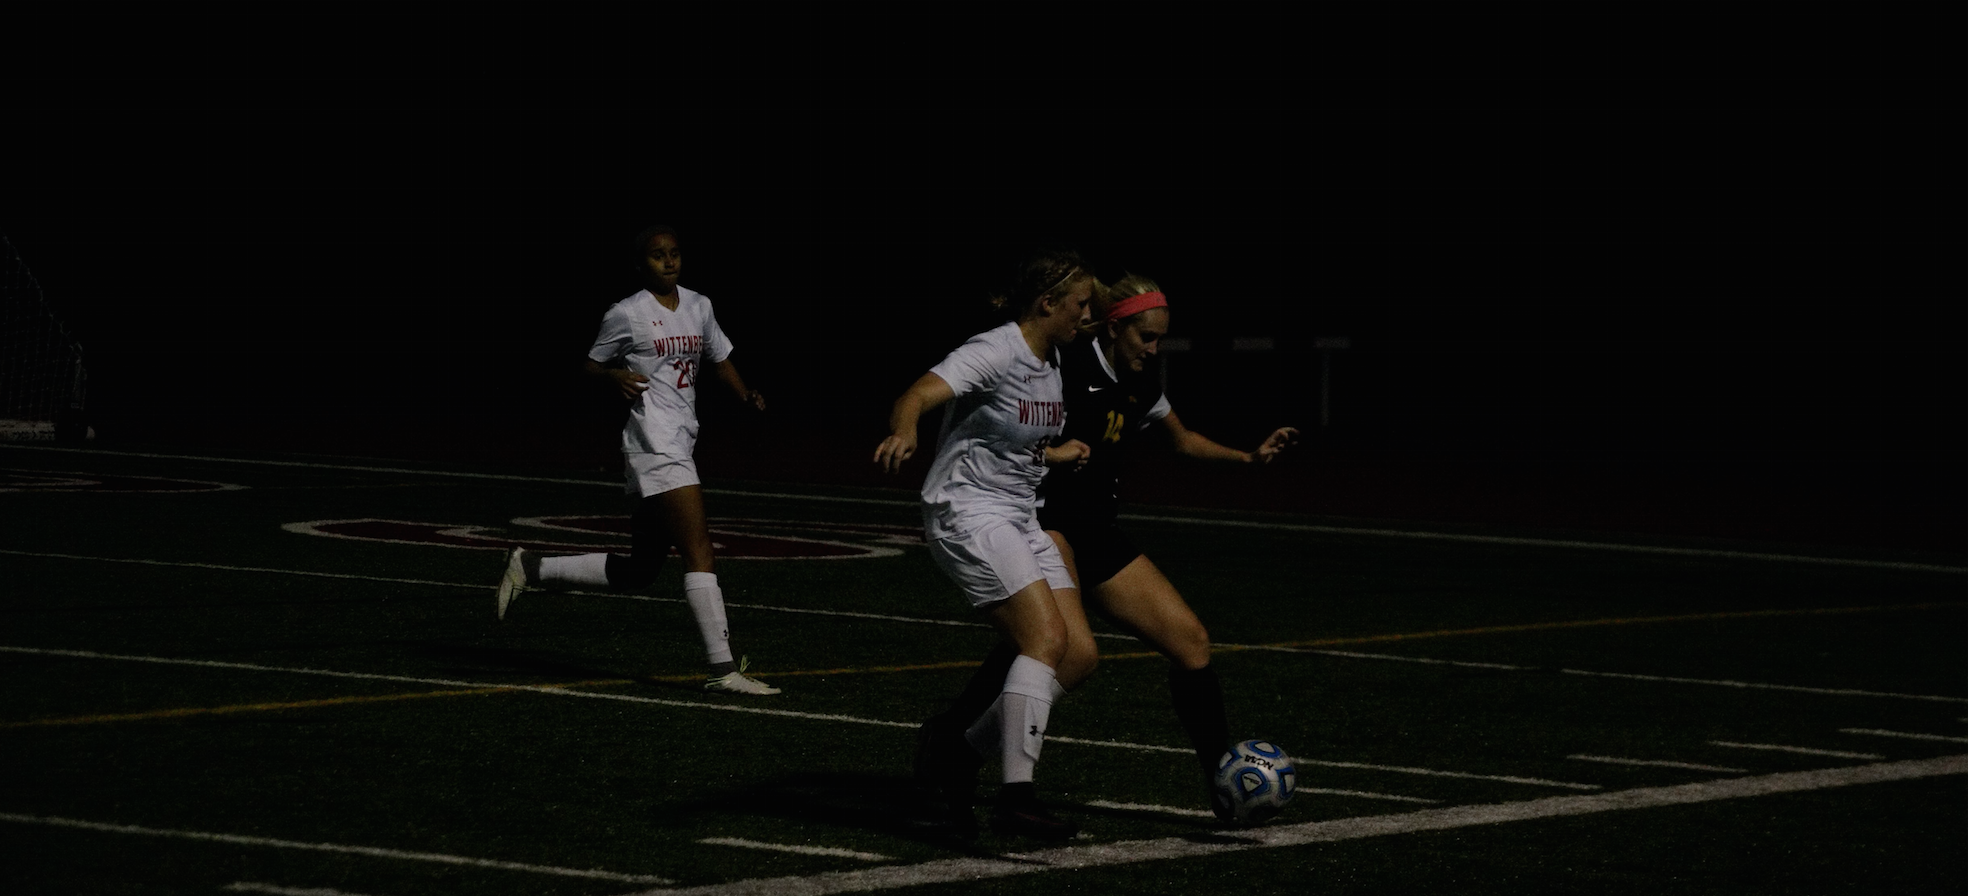 Women's Soccer Guts Out 1-0 Win Over Terriers on Senior Night